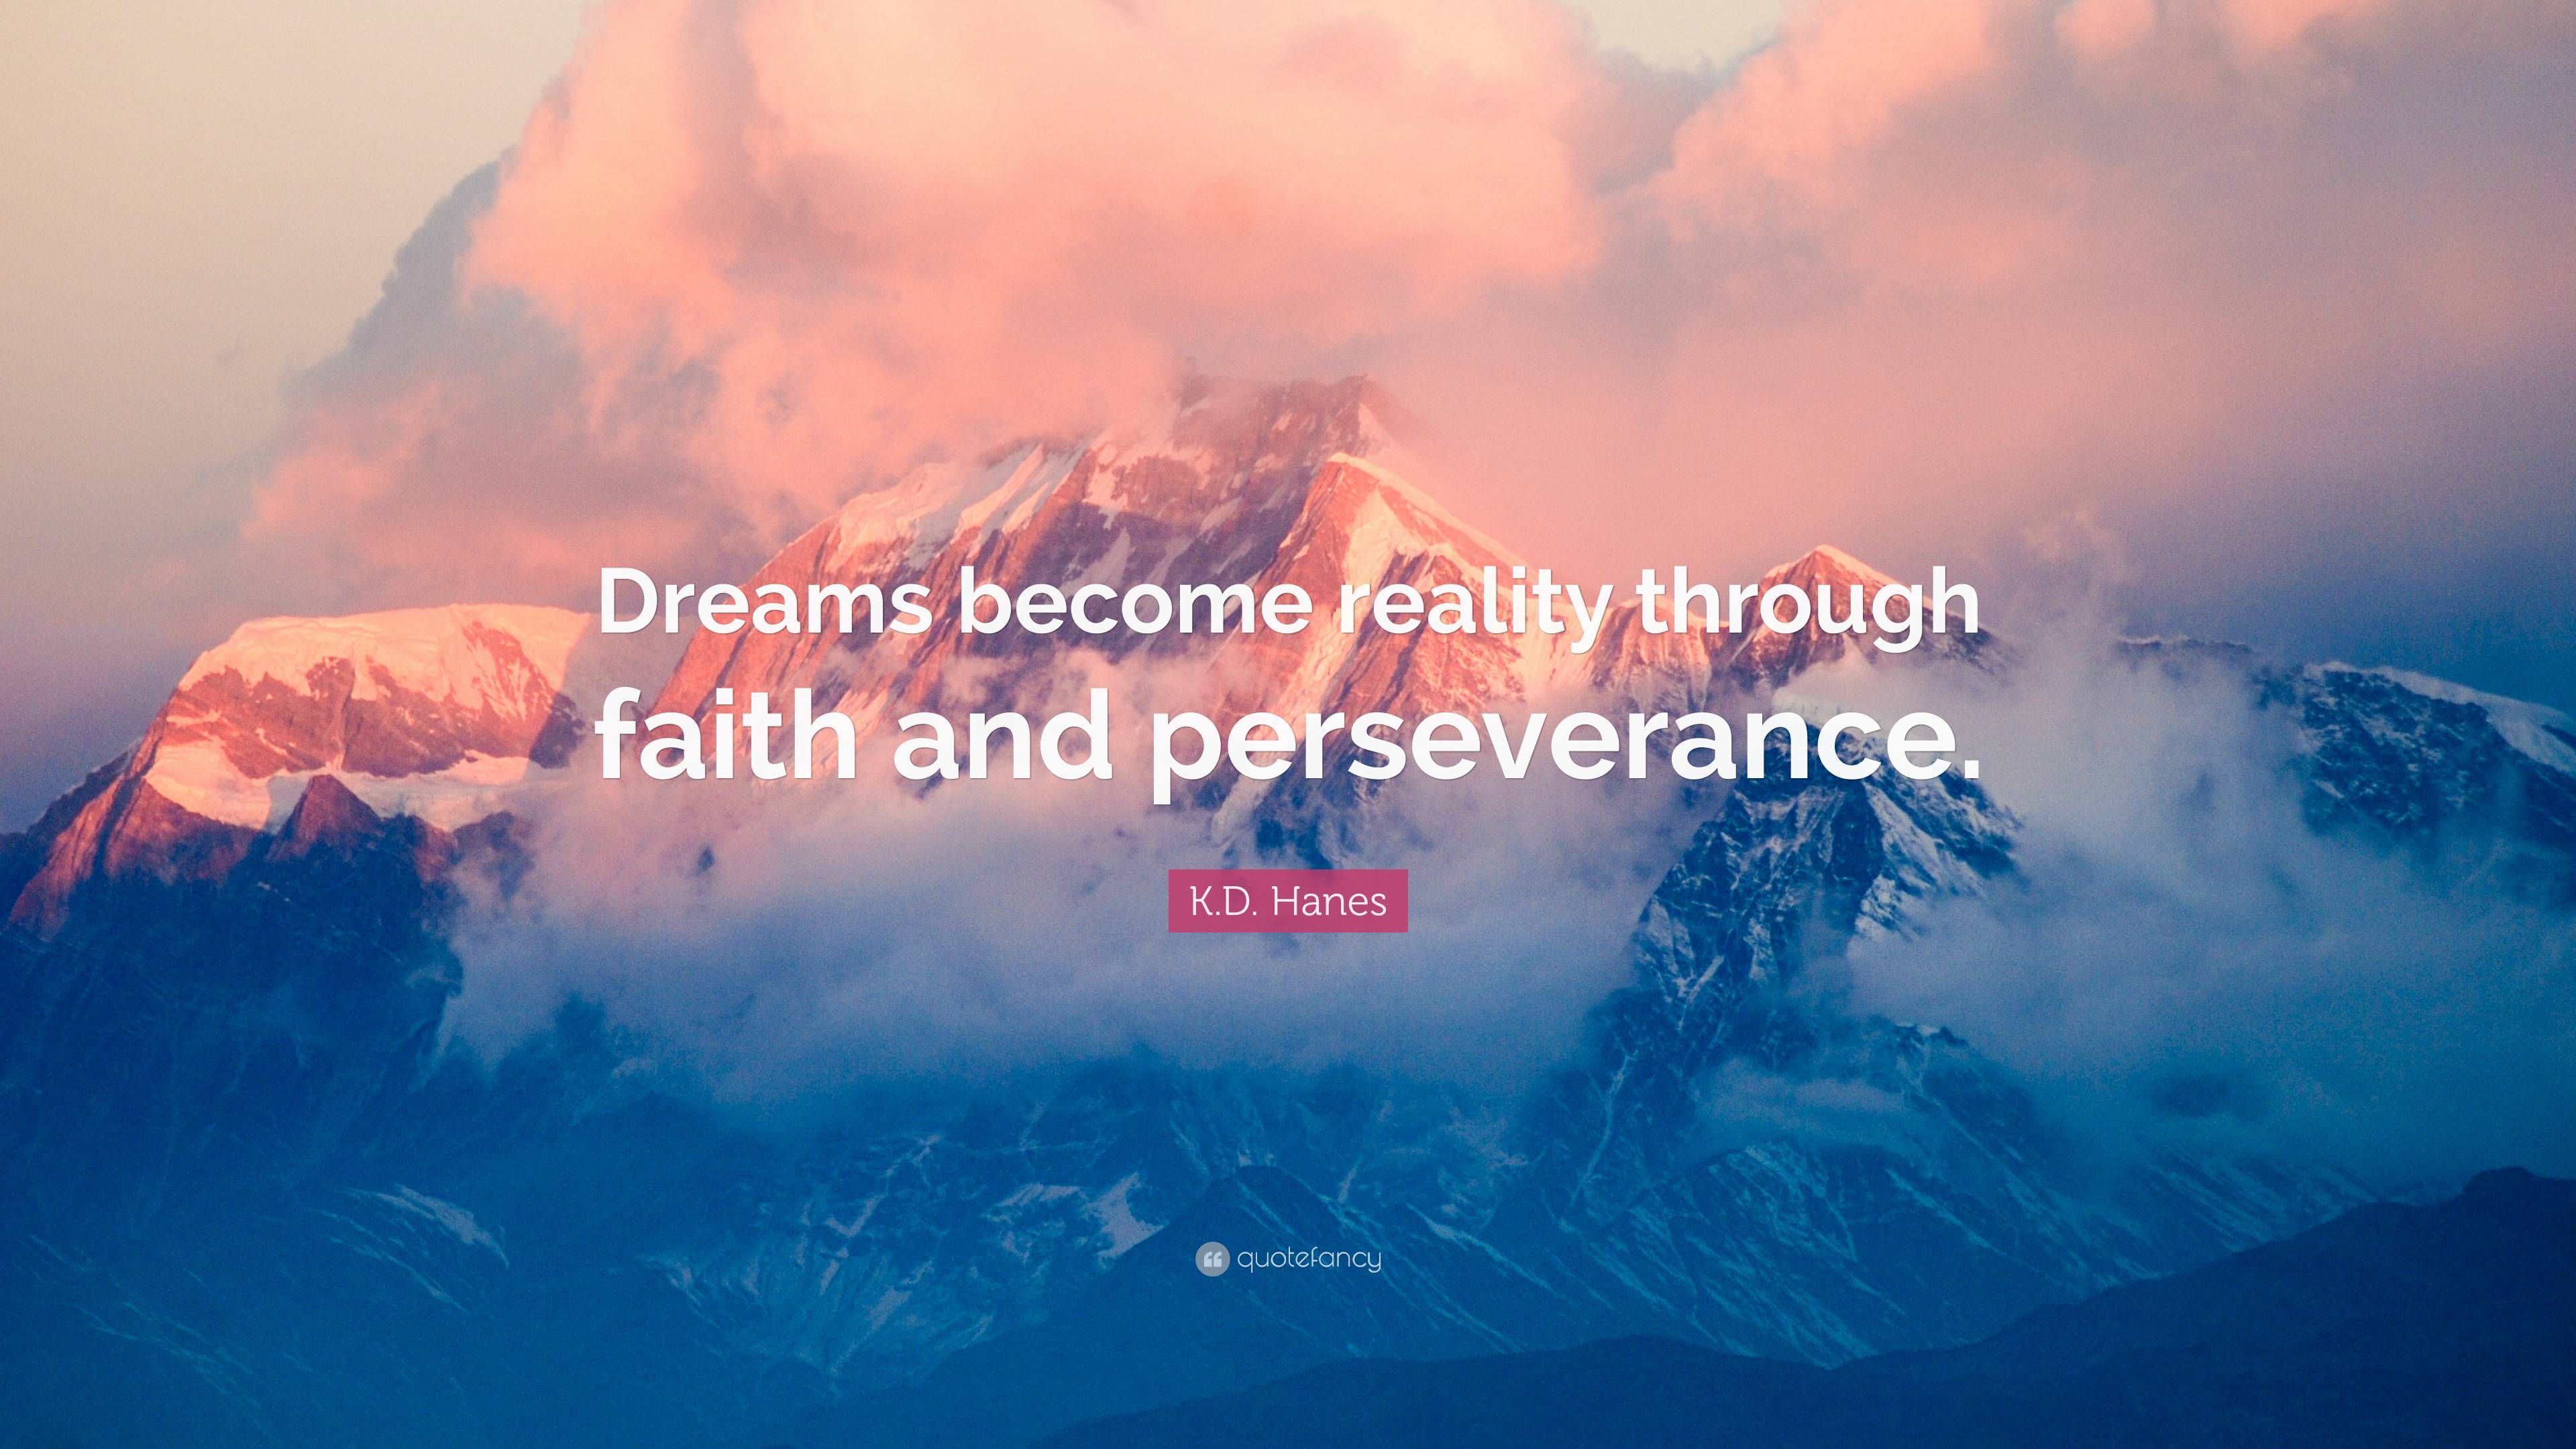 K.D. Hanes Quote: “Dreams become reality through faith and perseverance.”